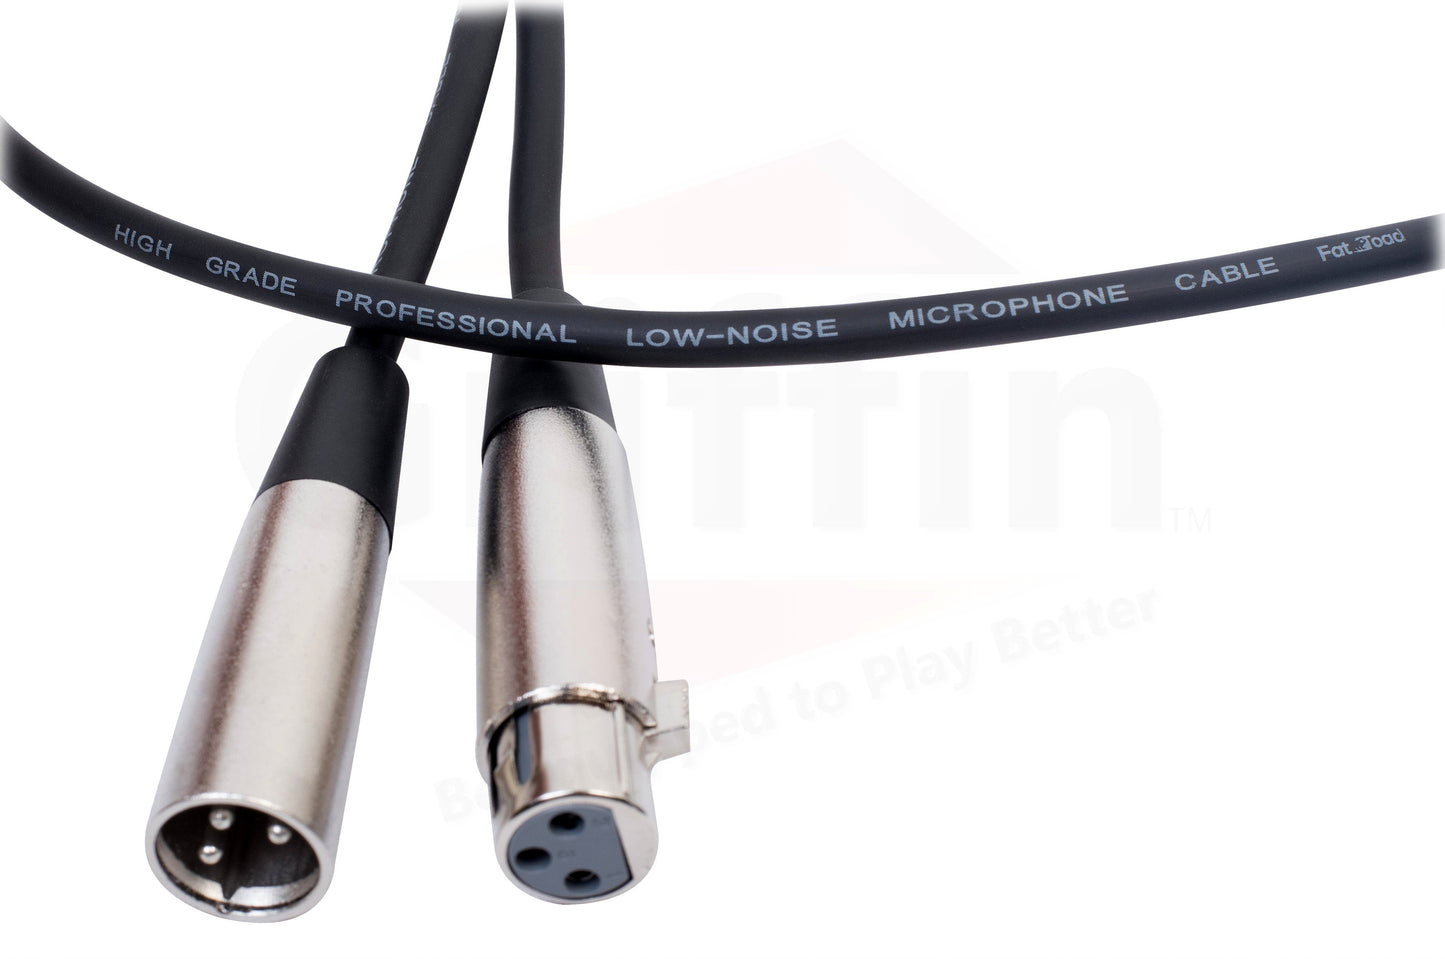 XLR Microphone Cable by FAT TOAD - 20ft Professional Pro Audio Mic Cord Extension Patch with Male to Female Lo-Z Connector - 24 AWG Wire & Balanced